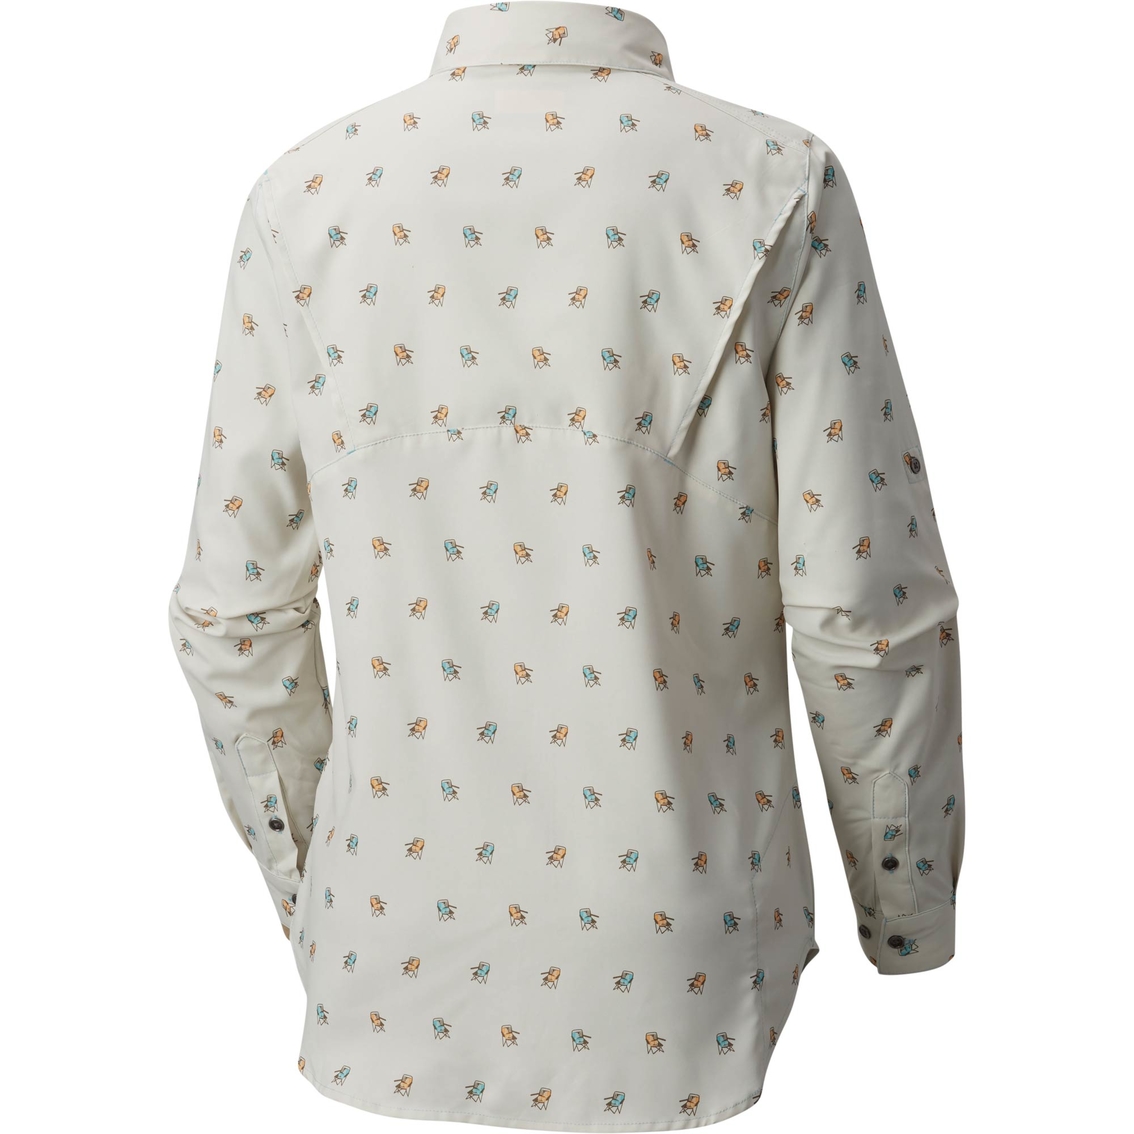 Columbia Bryce Canyon Stretch Shirt - Image 2 of 3